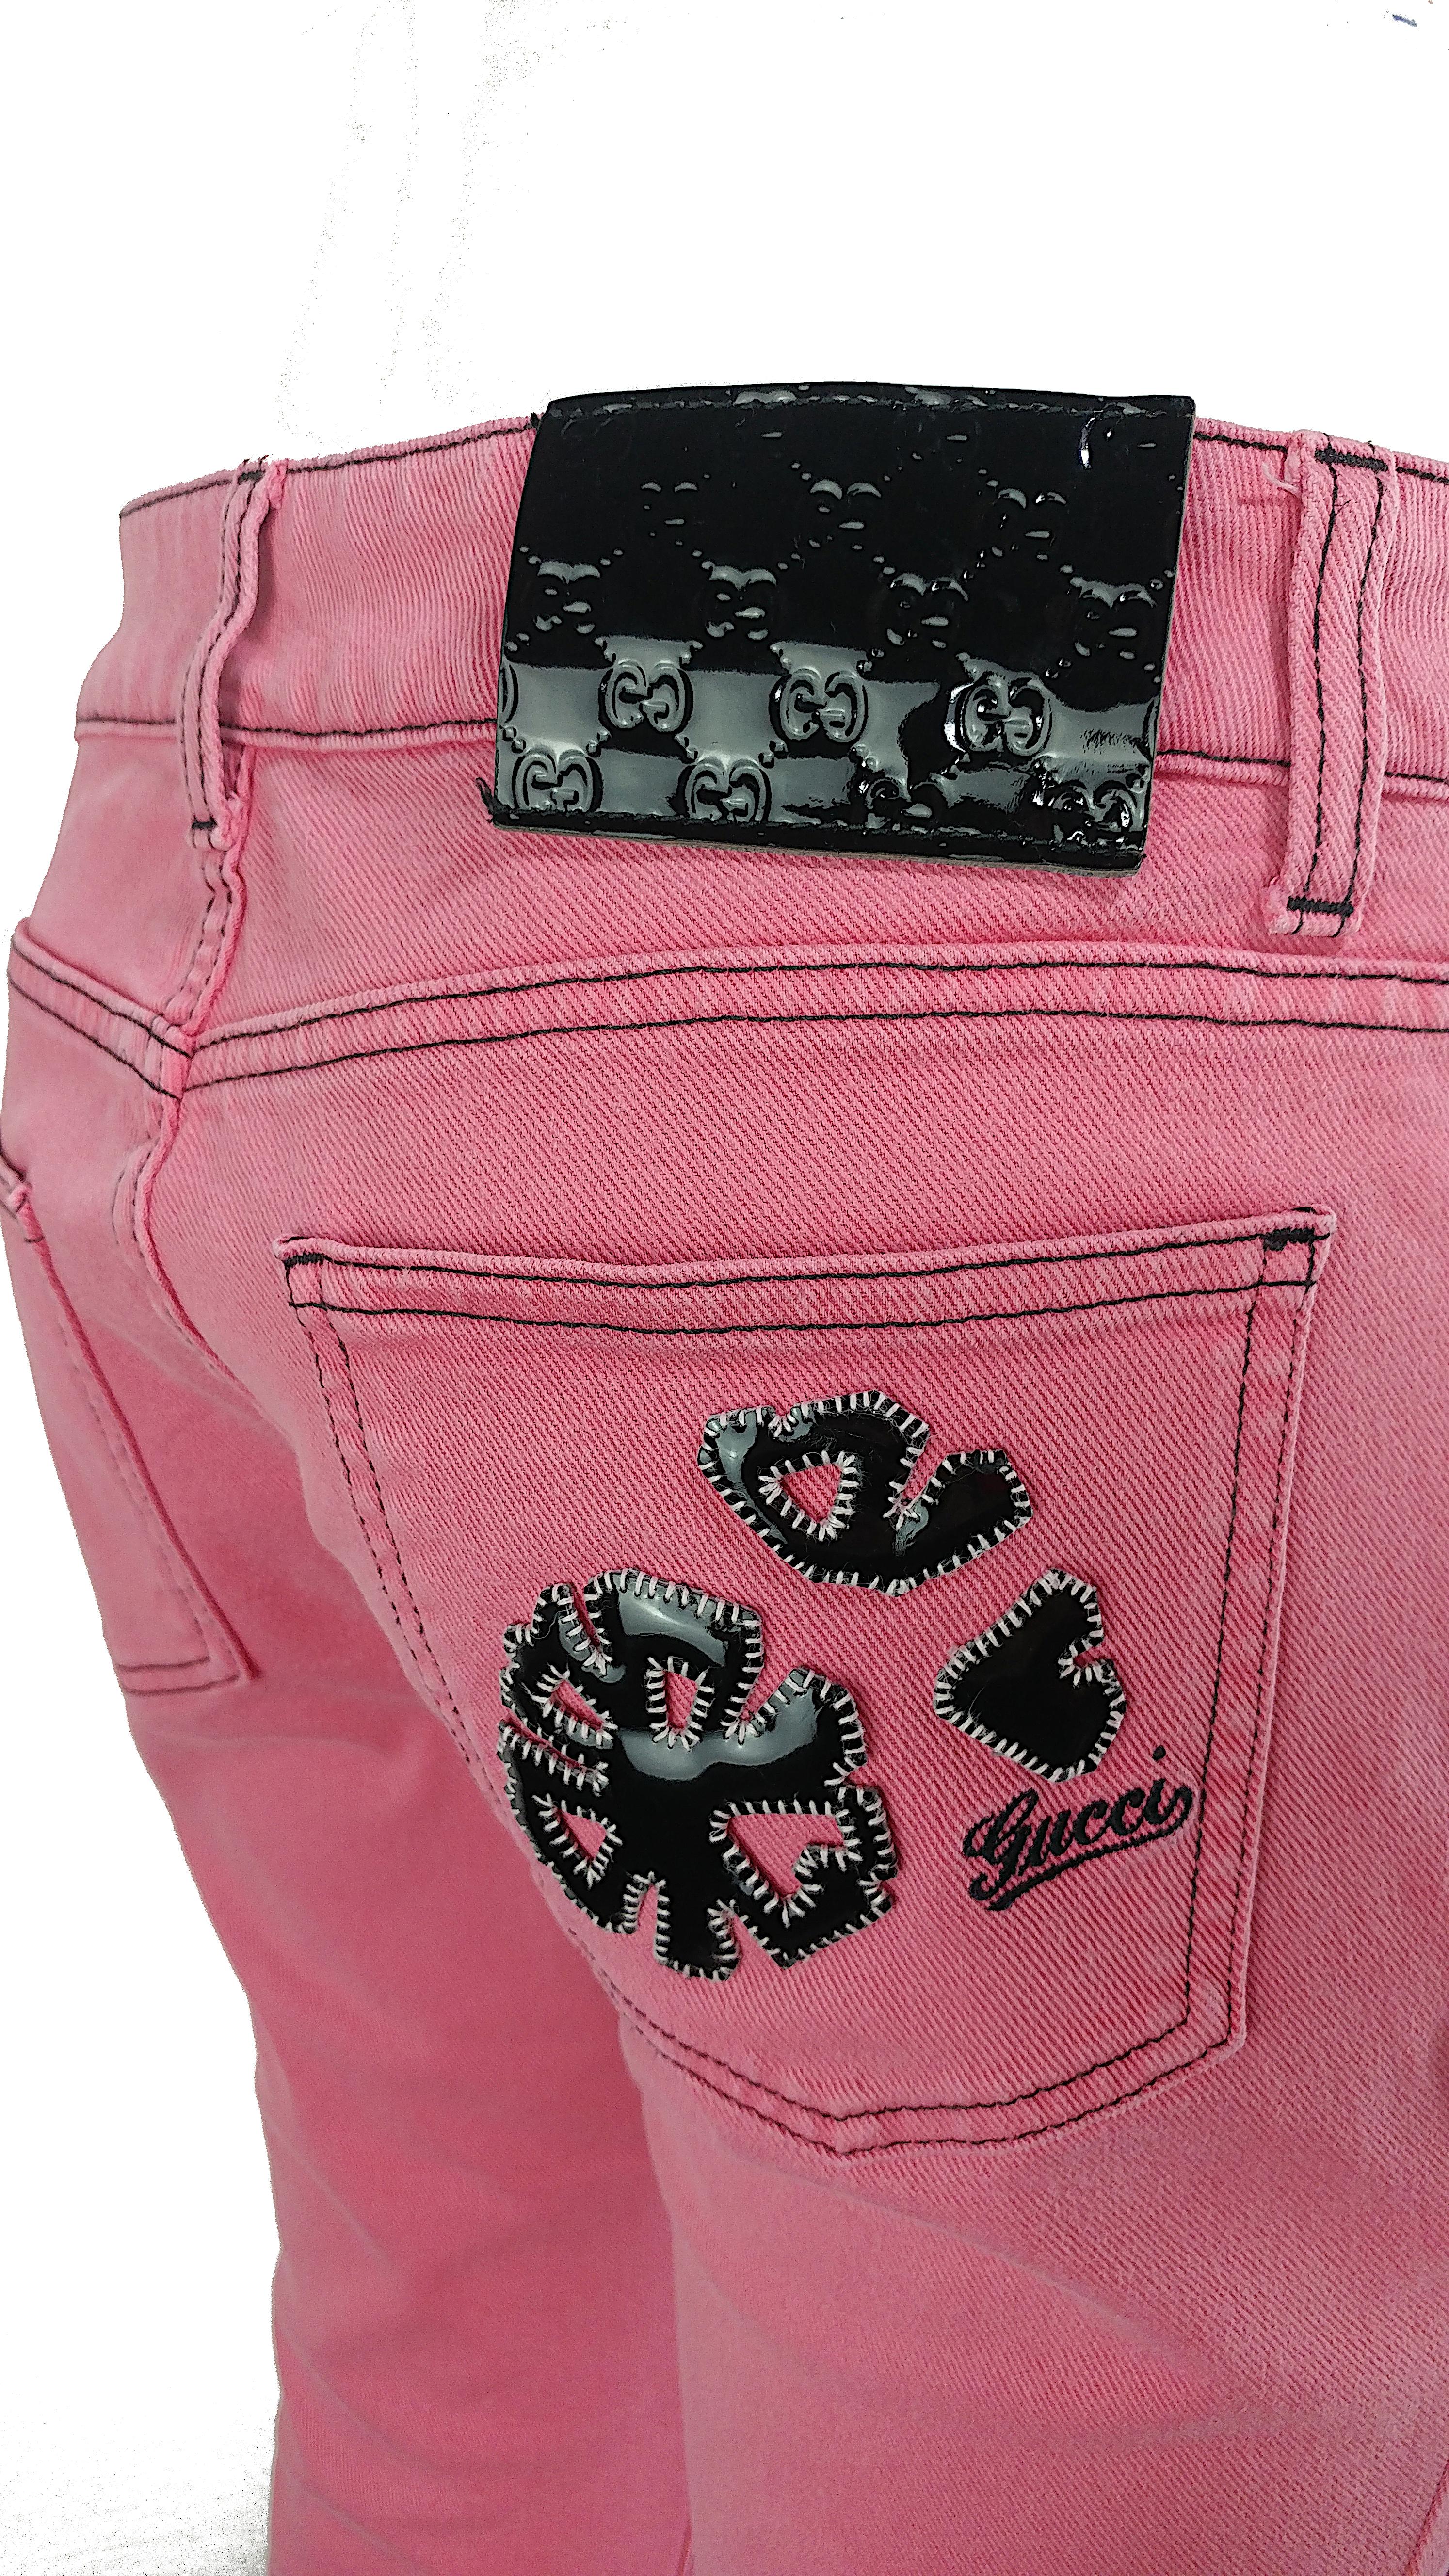 Women's GUCCI - Vintage Pink Jeans with Black Stitchings and Patches  Size 6US 38EU